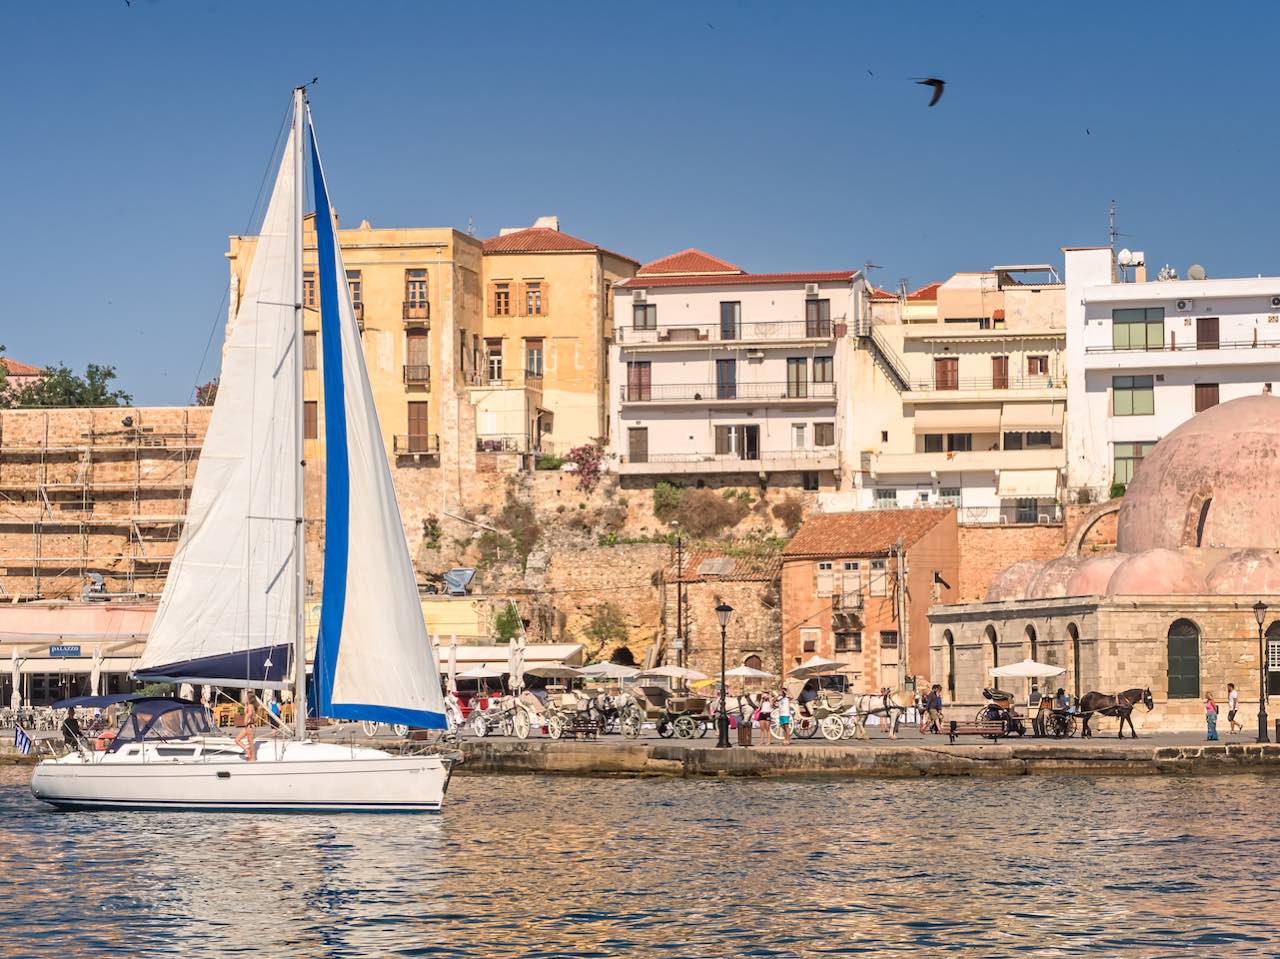 A Day Out Sailing Chania, Short Day Private sailing Tour, sailing chania crete, sailing activities chania, chania activities, best sailing trip chania crete, chania sailing theodorou island, agioi theodoroi island sailing chania, sail fishing summer, sailing in Crete